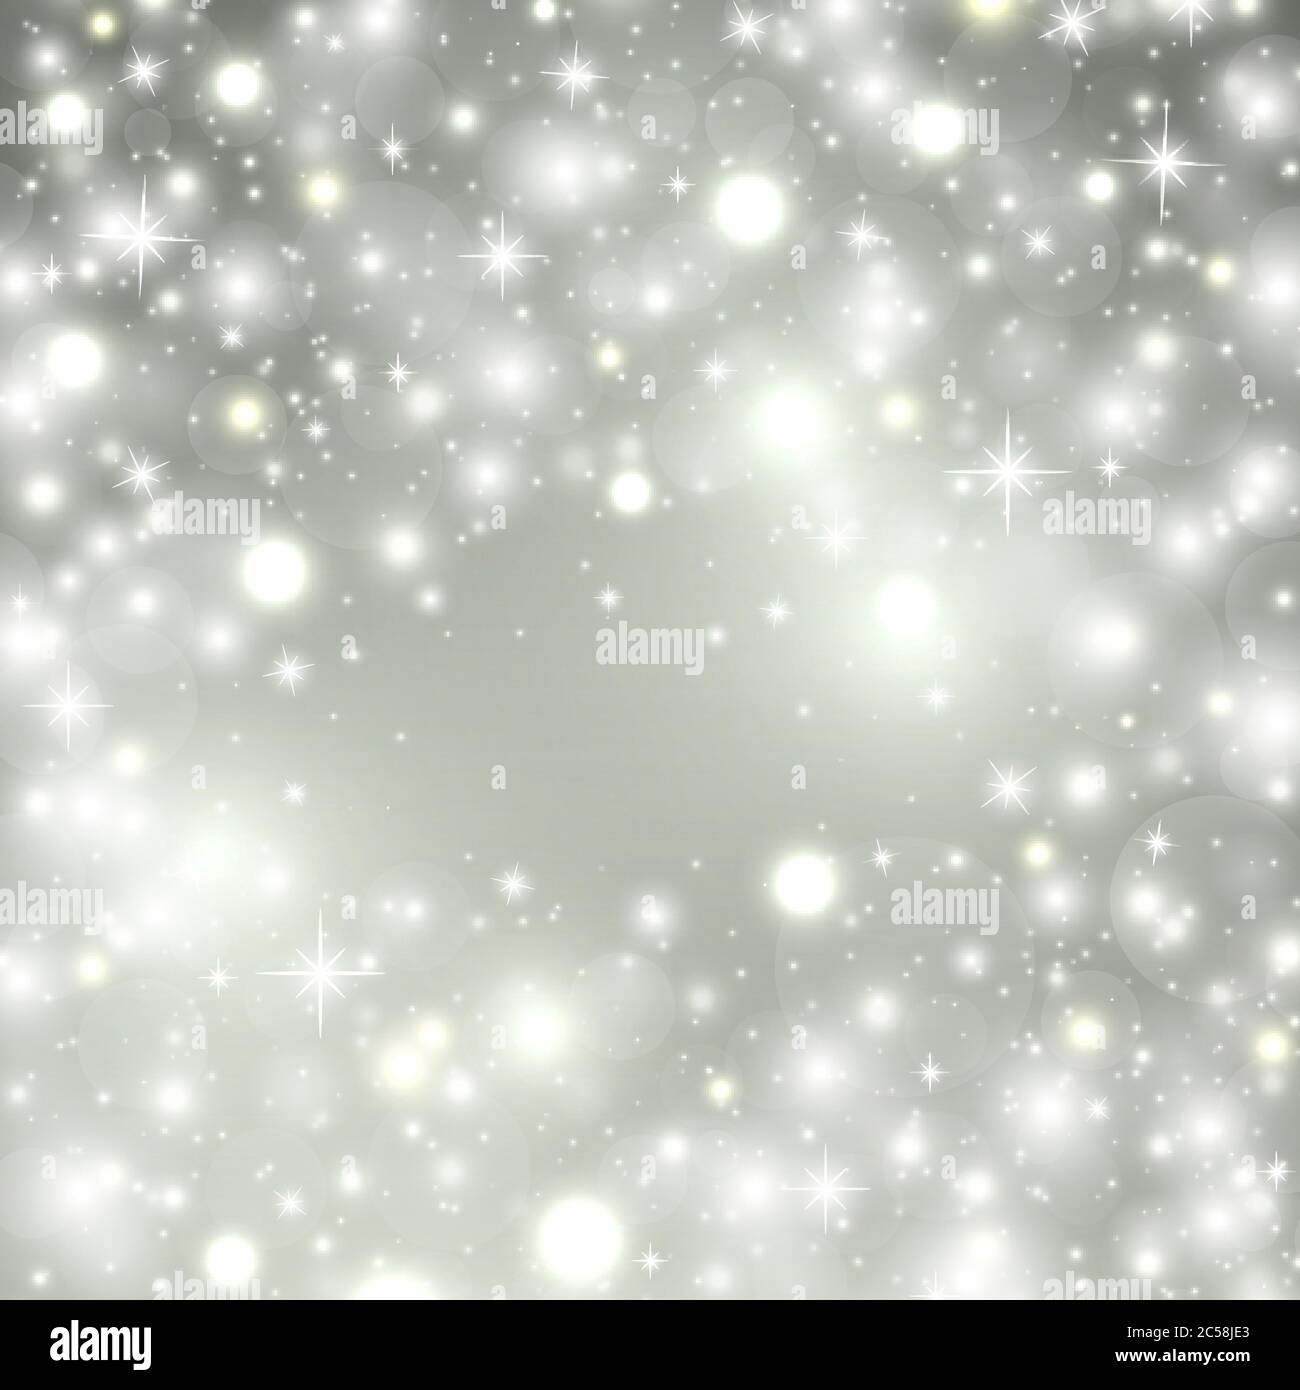 Silver winter abstract background. Shine background with glowing stars, lights, sparkles, snowflakes and place for text. Christmas concept. Vector Stock Vector